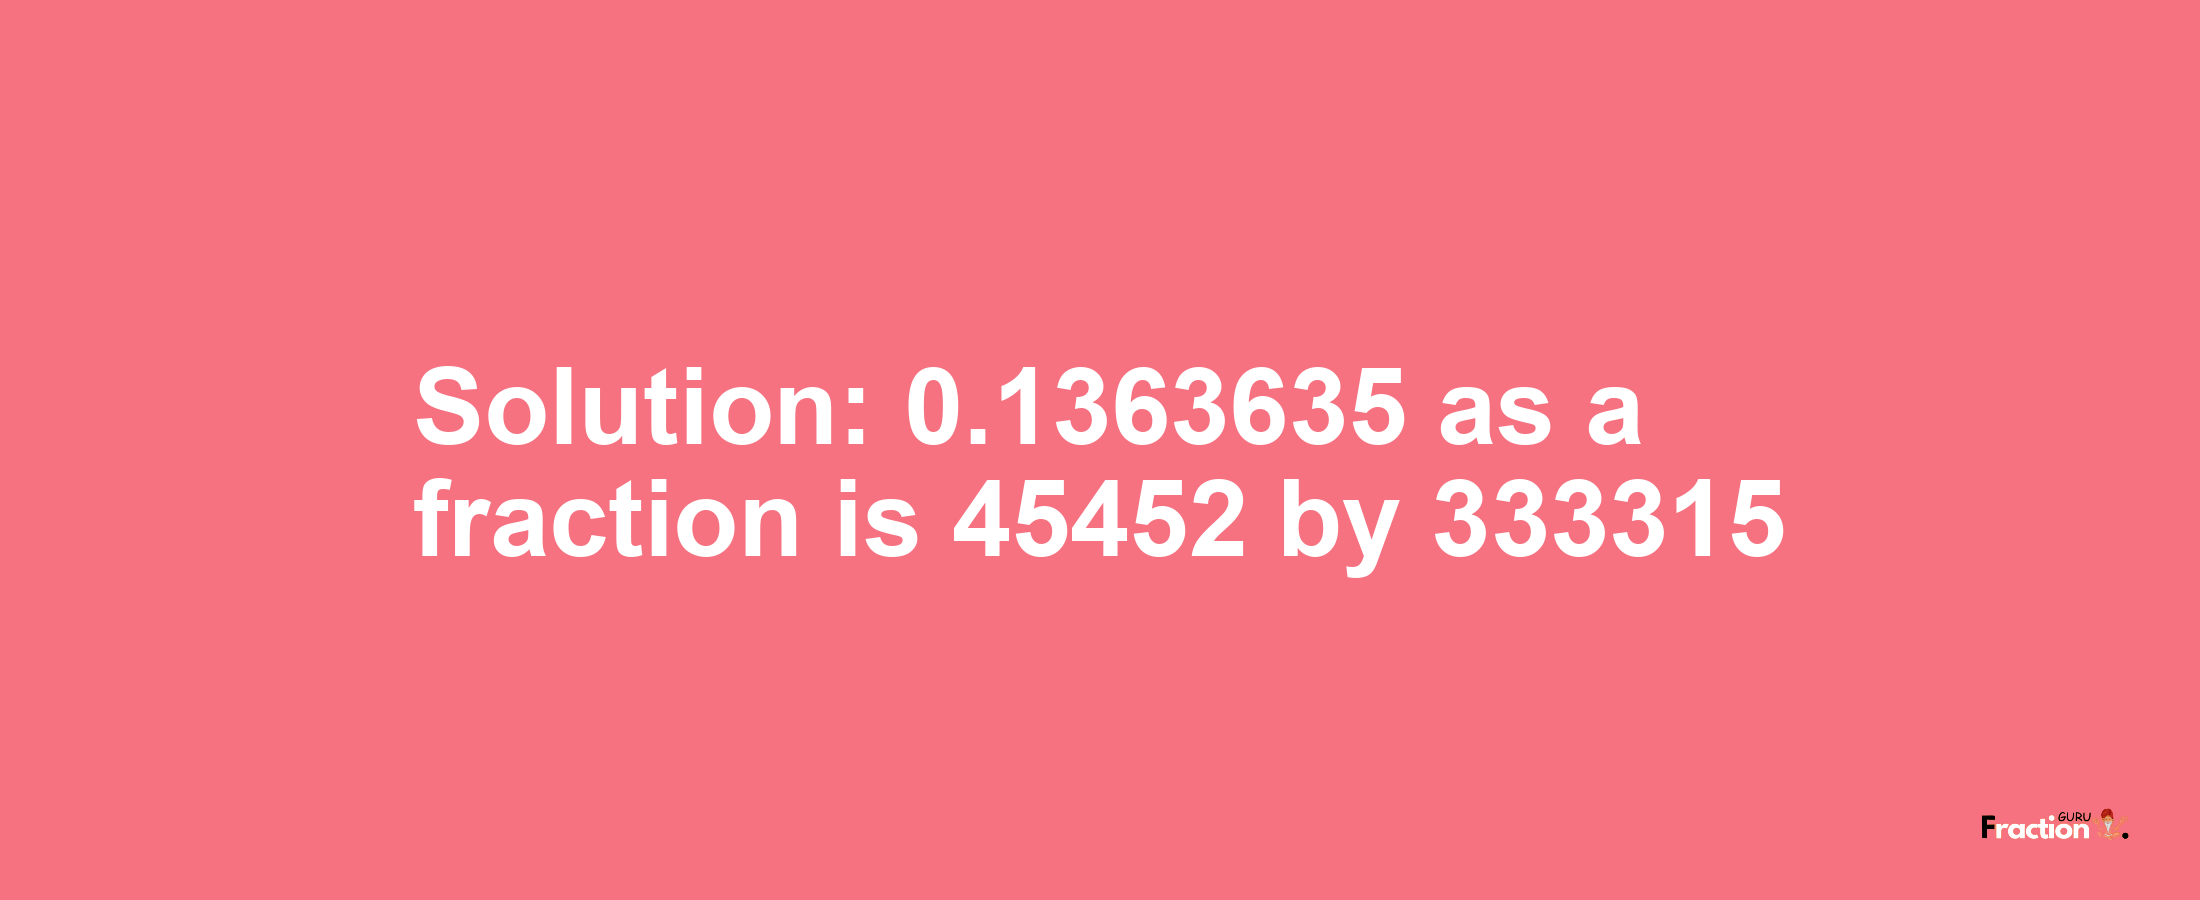 Solution:0.1363635 as a fraction is 45452/333315